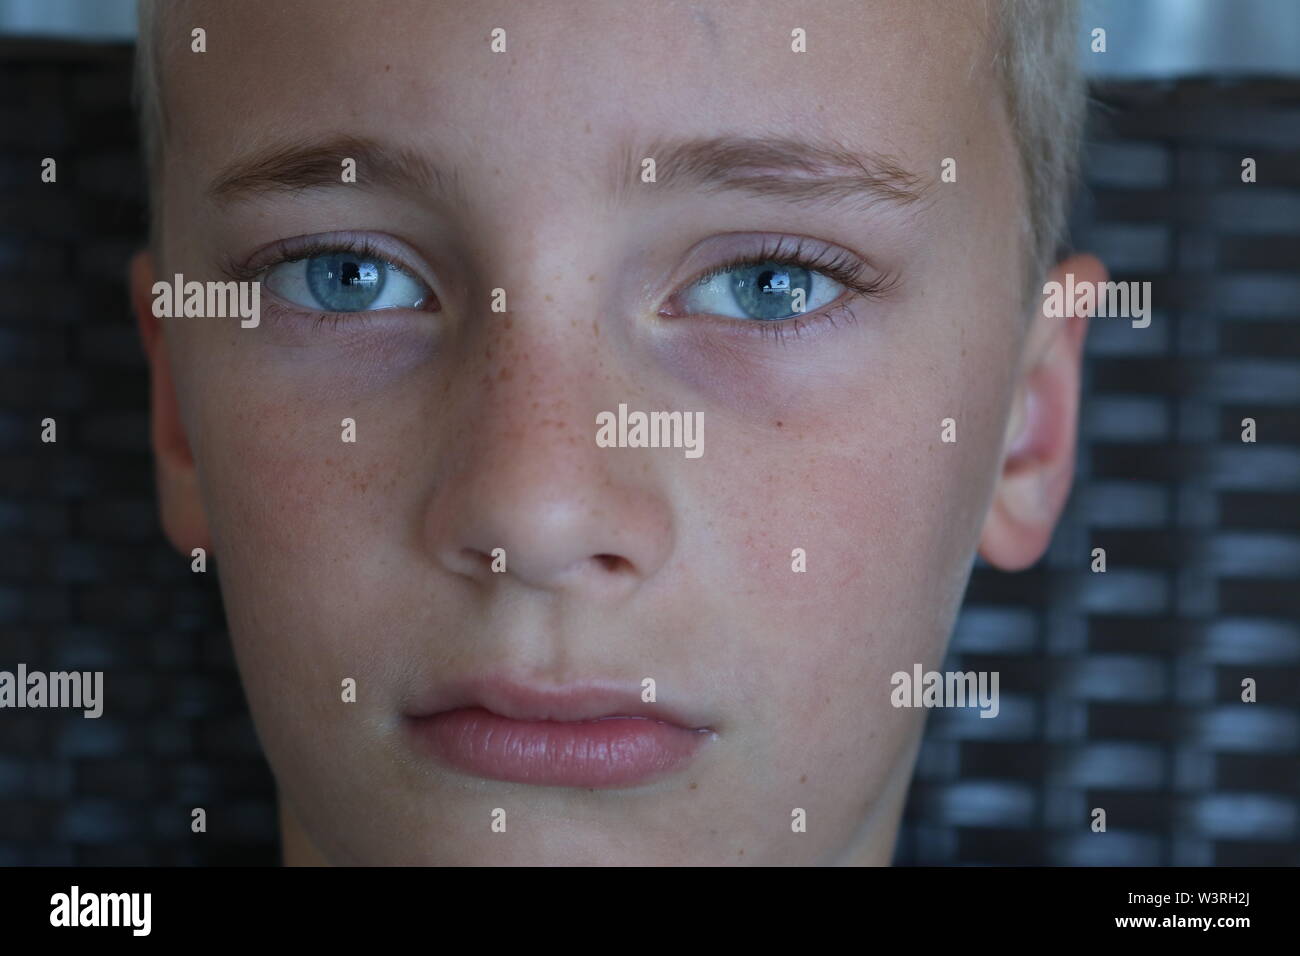 Portrait of an adolescent boy with a serious stare Stock Photo